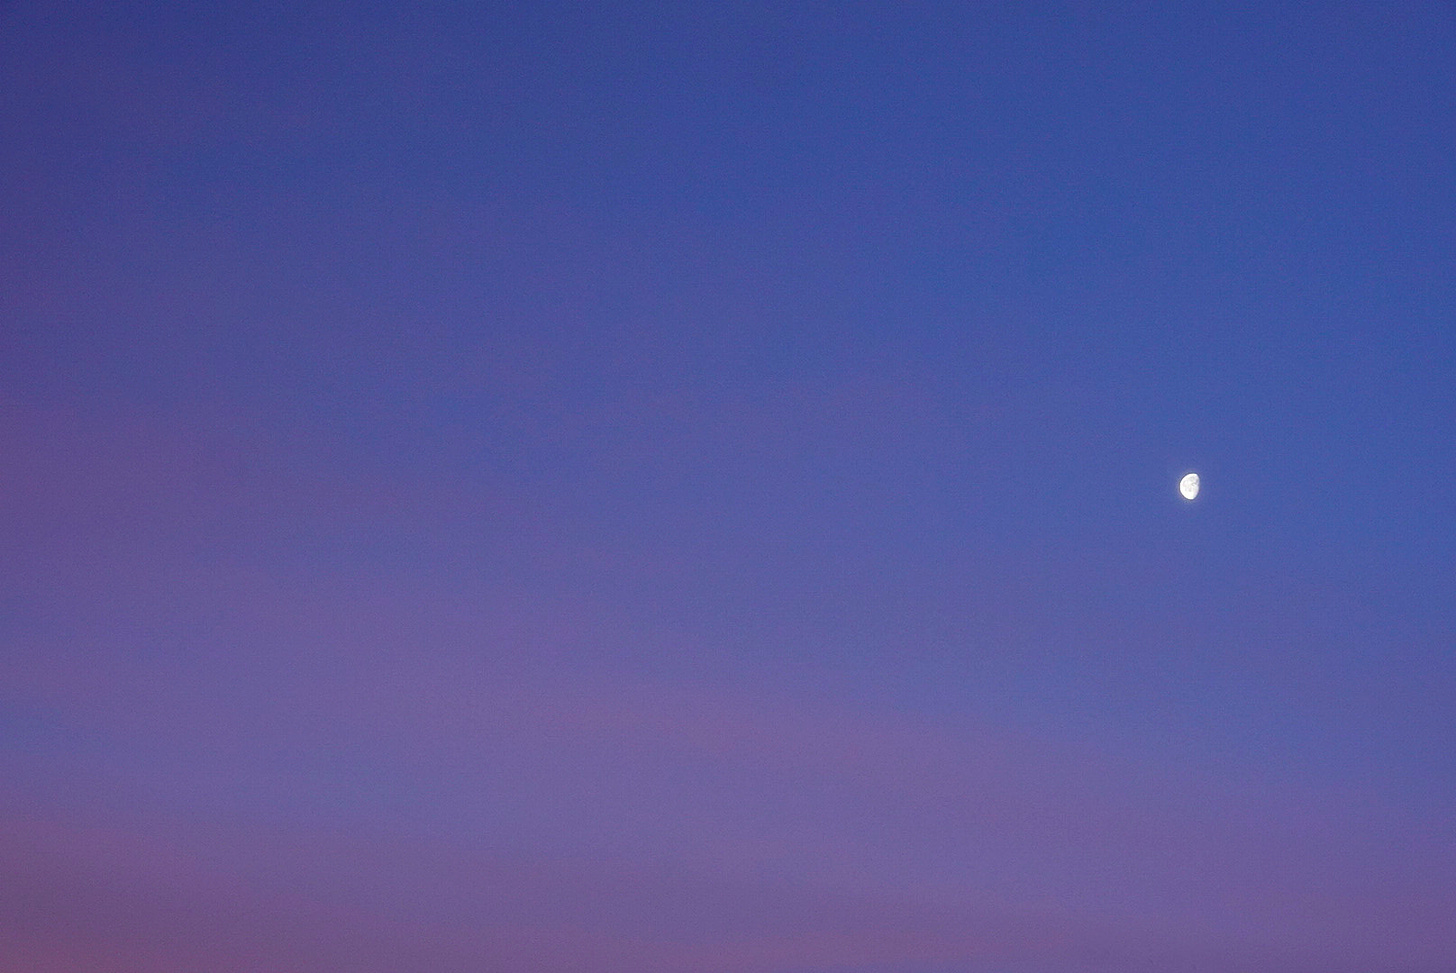 A bright moon in a deep blue sky marks the first day of the New Year